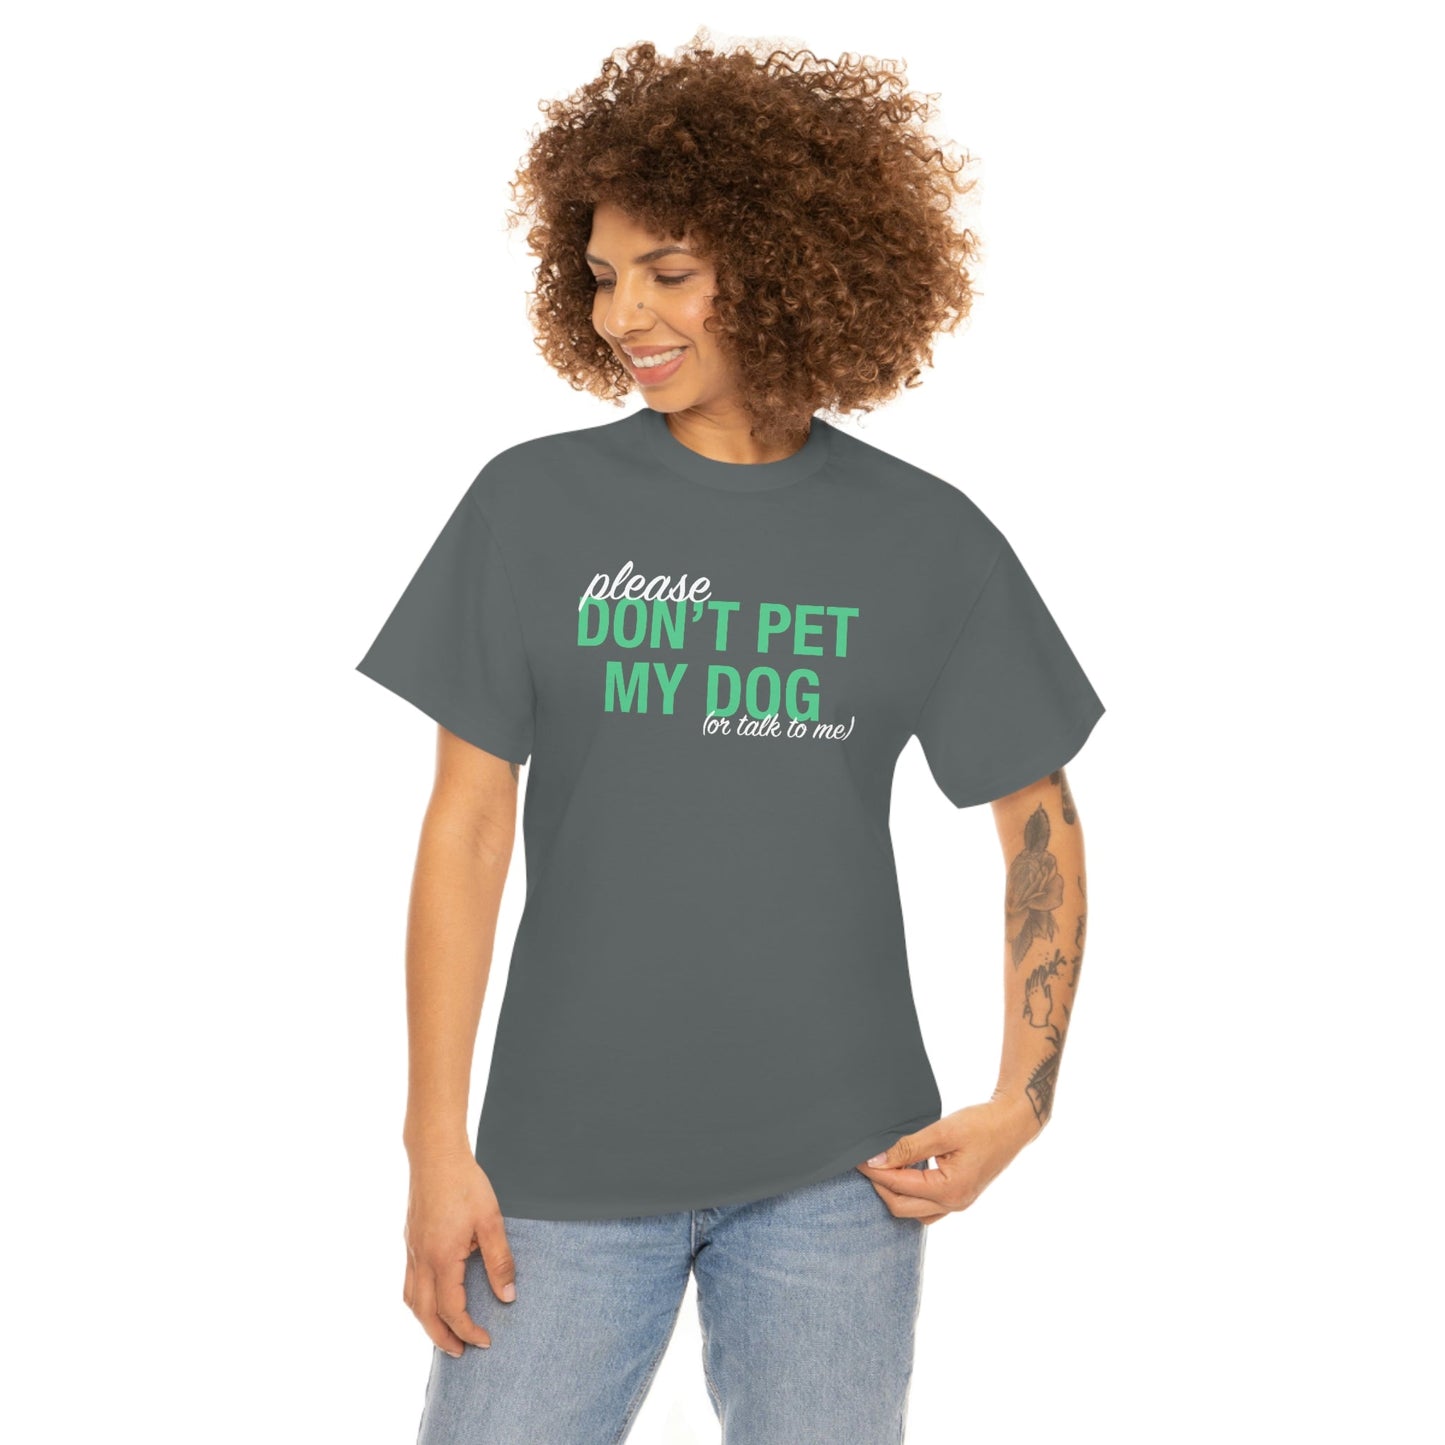 Please Don't Pet My Dog (Or Talk To Me) | Text Tees - Detezi Designs-61446006041671993799